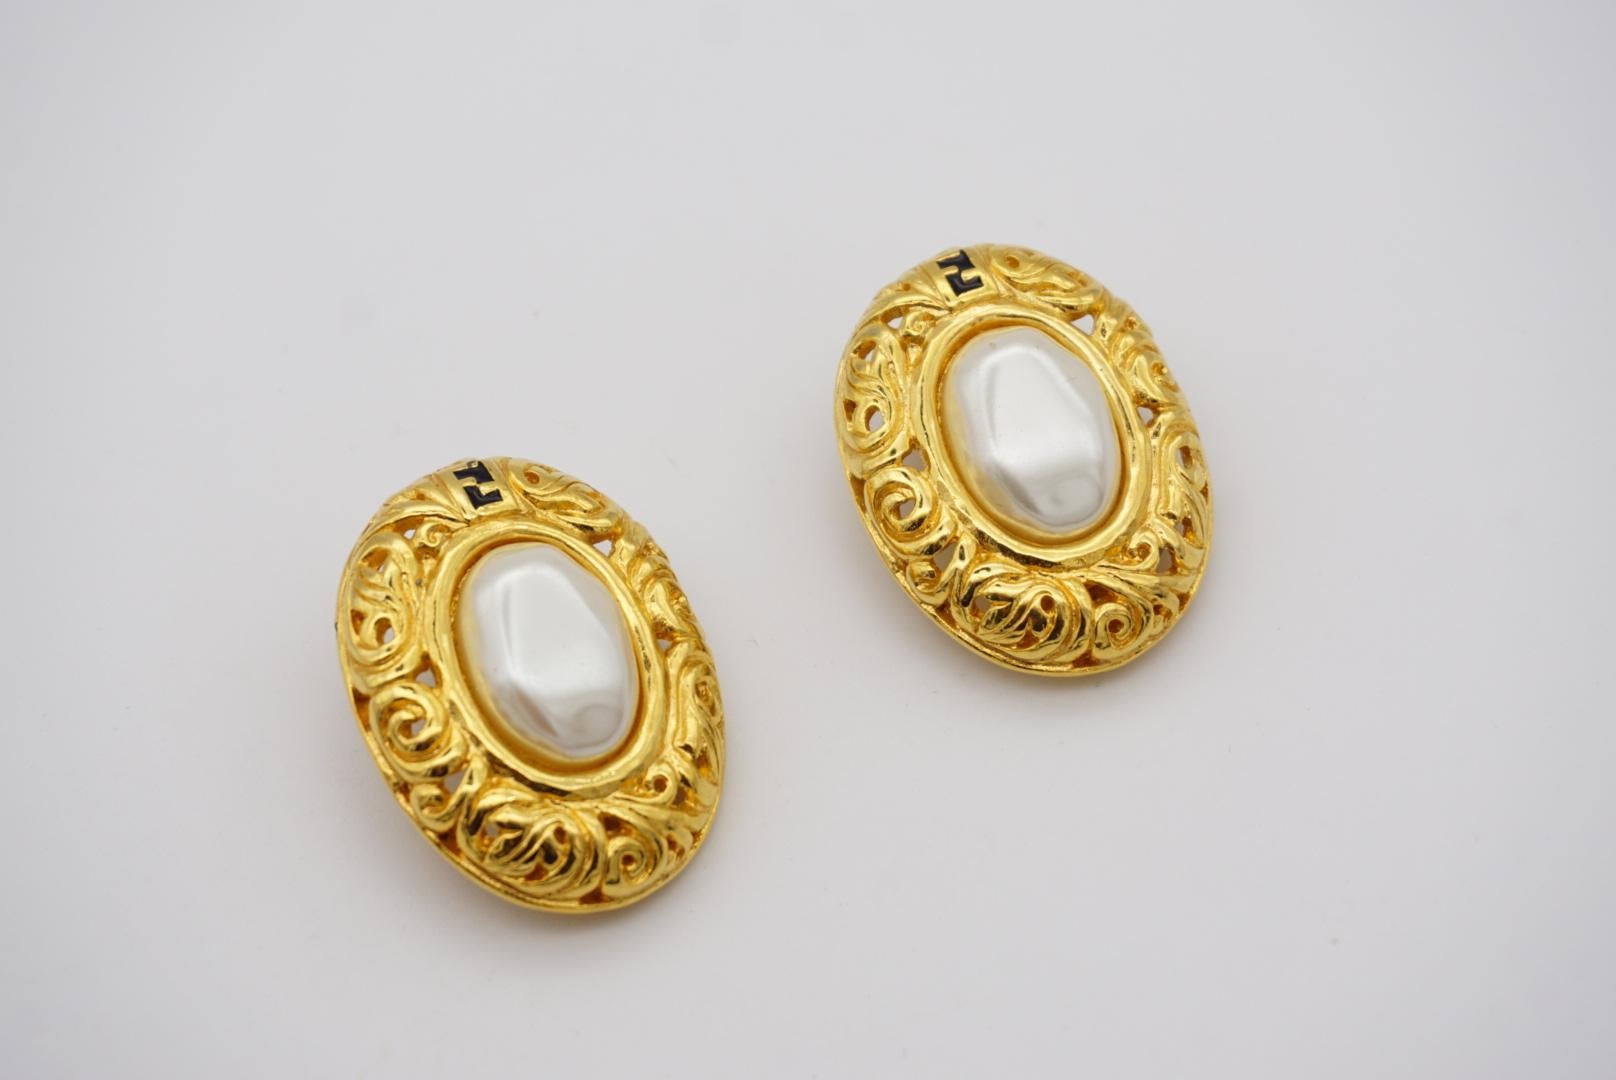 Fendi Vintage 1980s F Large Oval Leaves Hollow White Pearl Gold Clip On Earrings In Excellent Condition For Sale In Wokingham, England